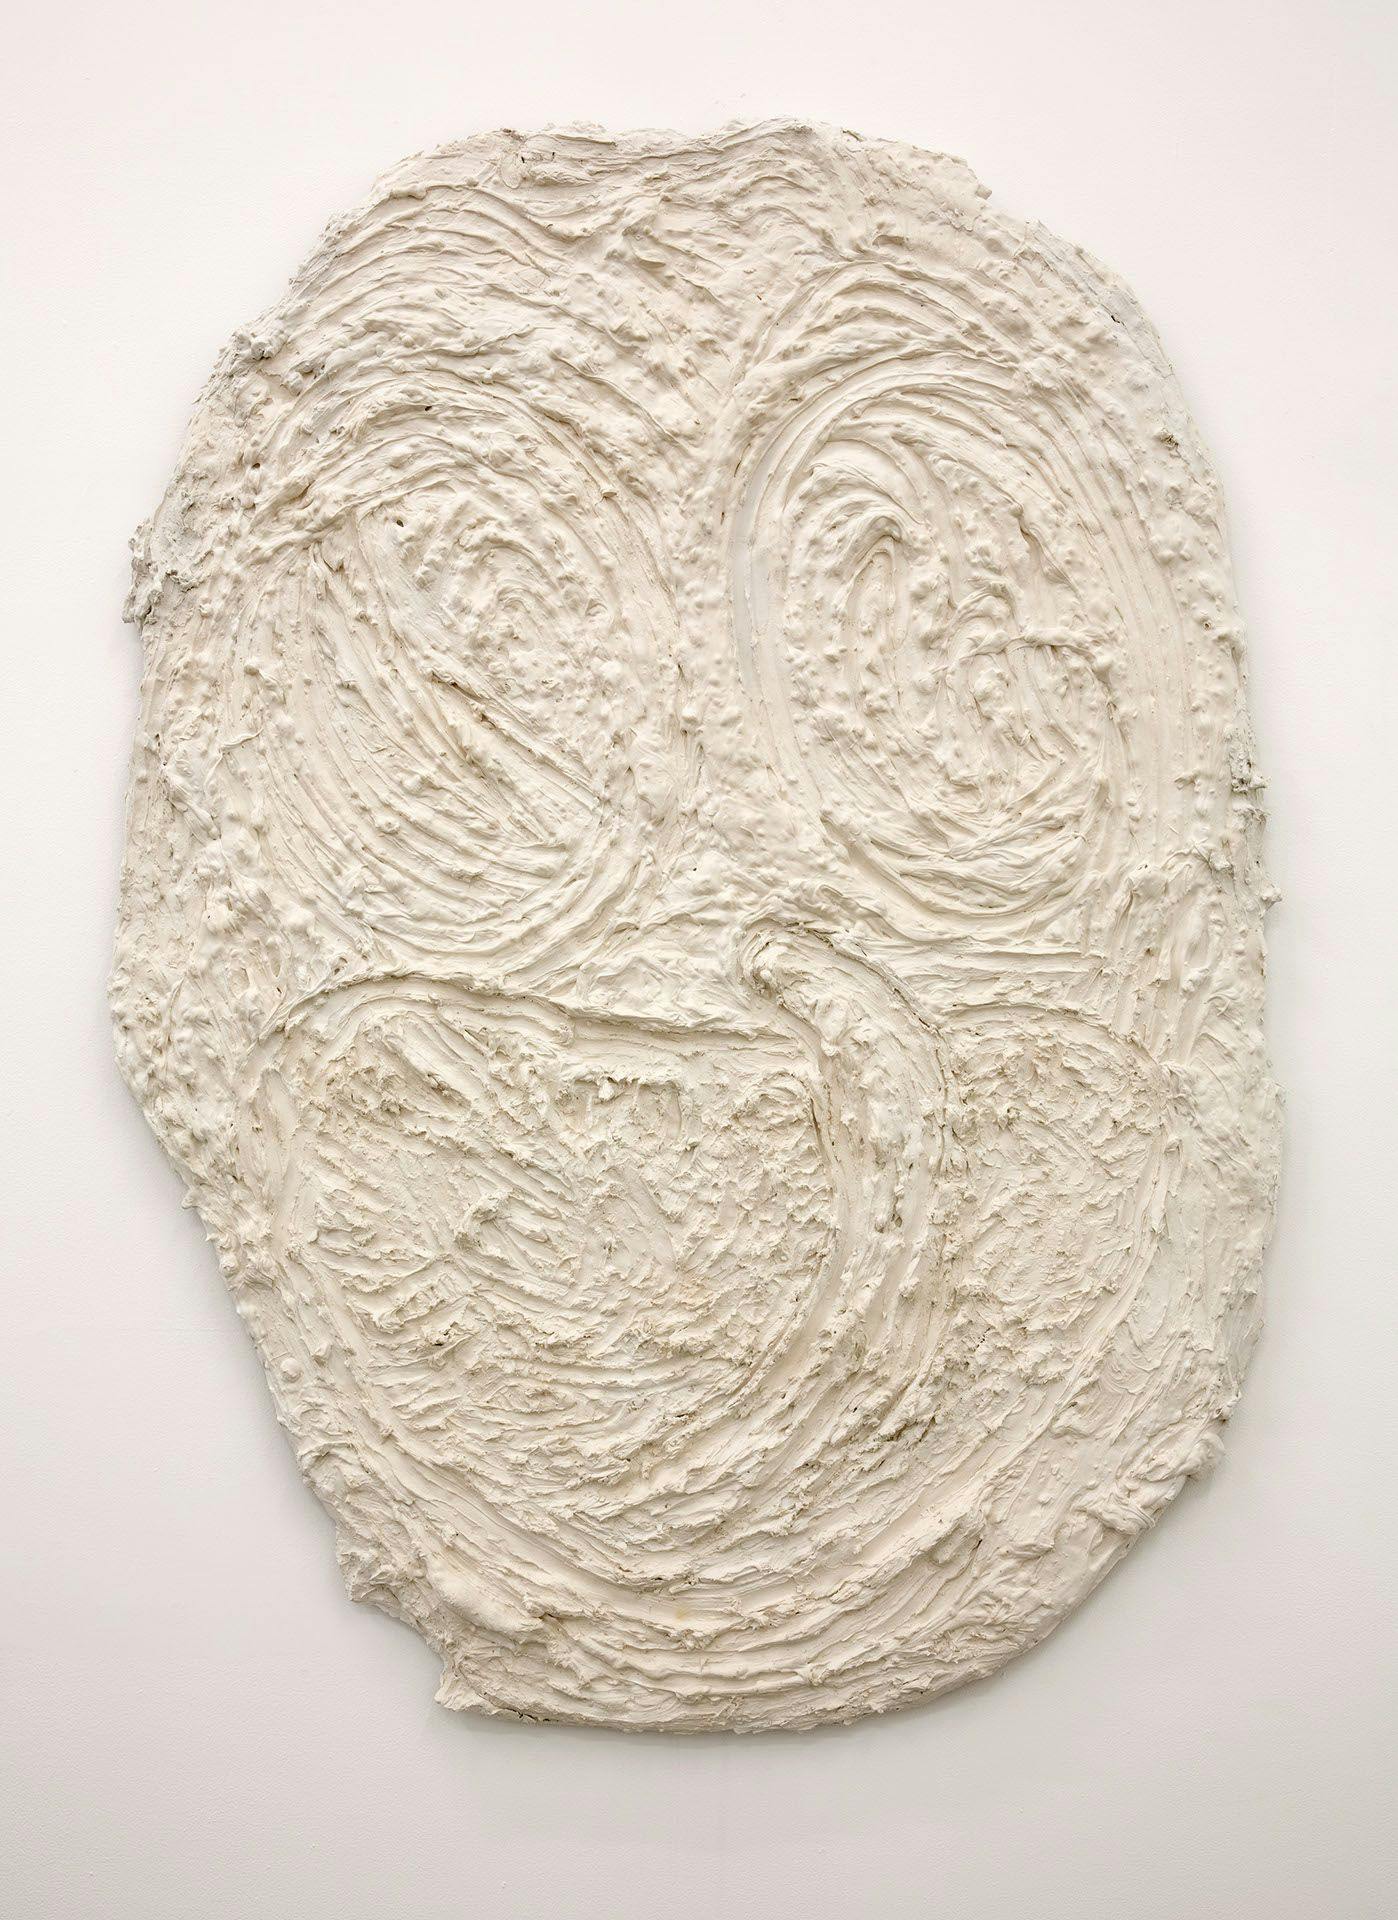 Untitled 4, 2015 

plaster, wire, wood

68 x 50 inches

